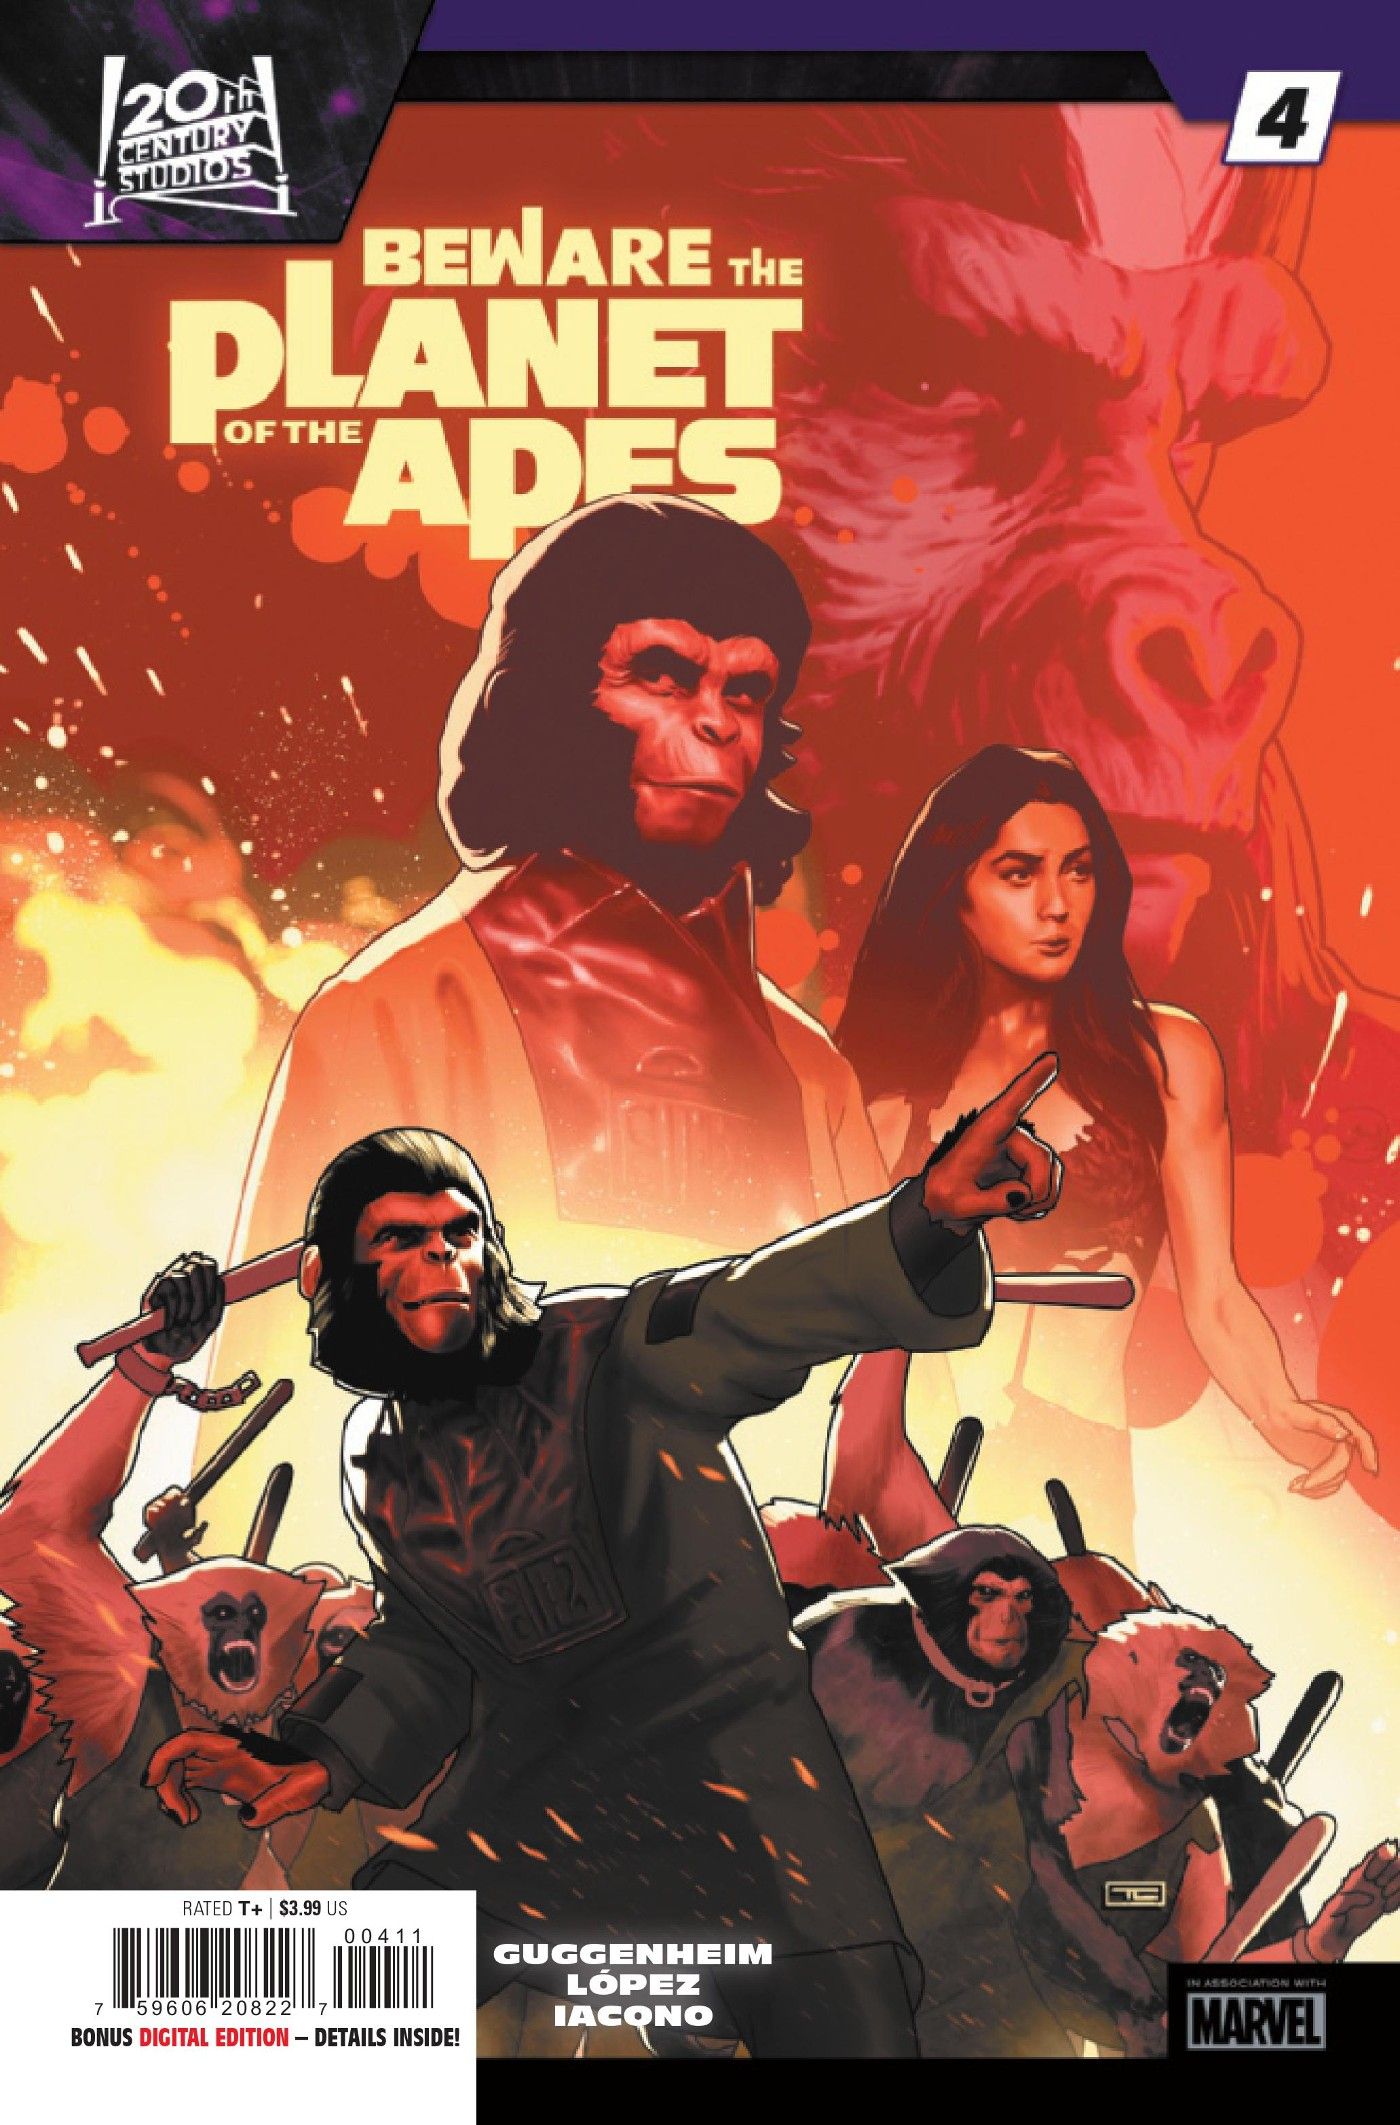 Beware the Planet of the Apes #4 cover, Zira leading an army of rebelling bonobos against a fiery backdrop